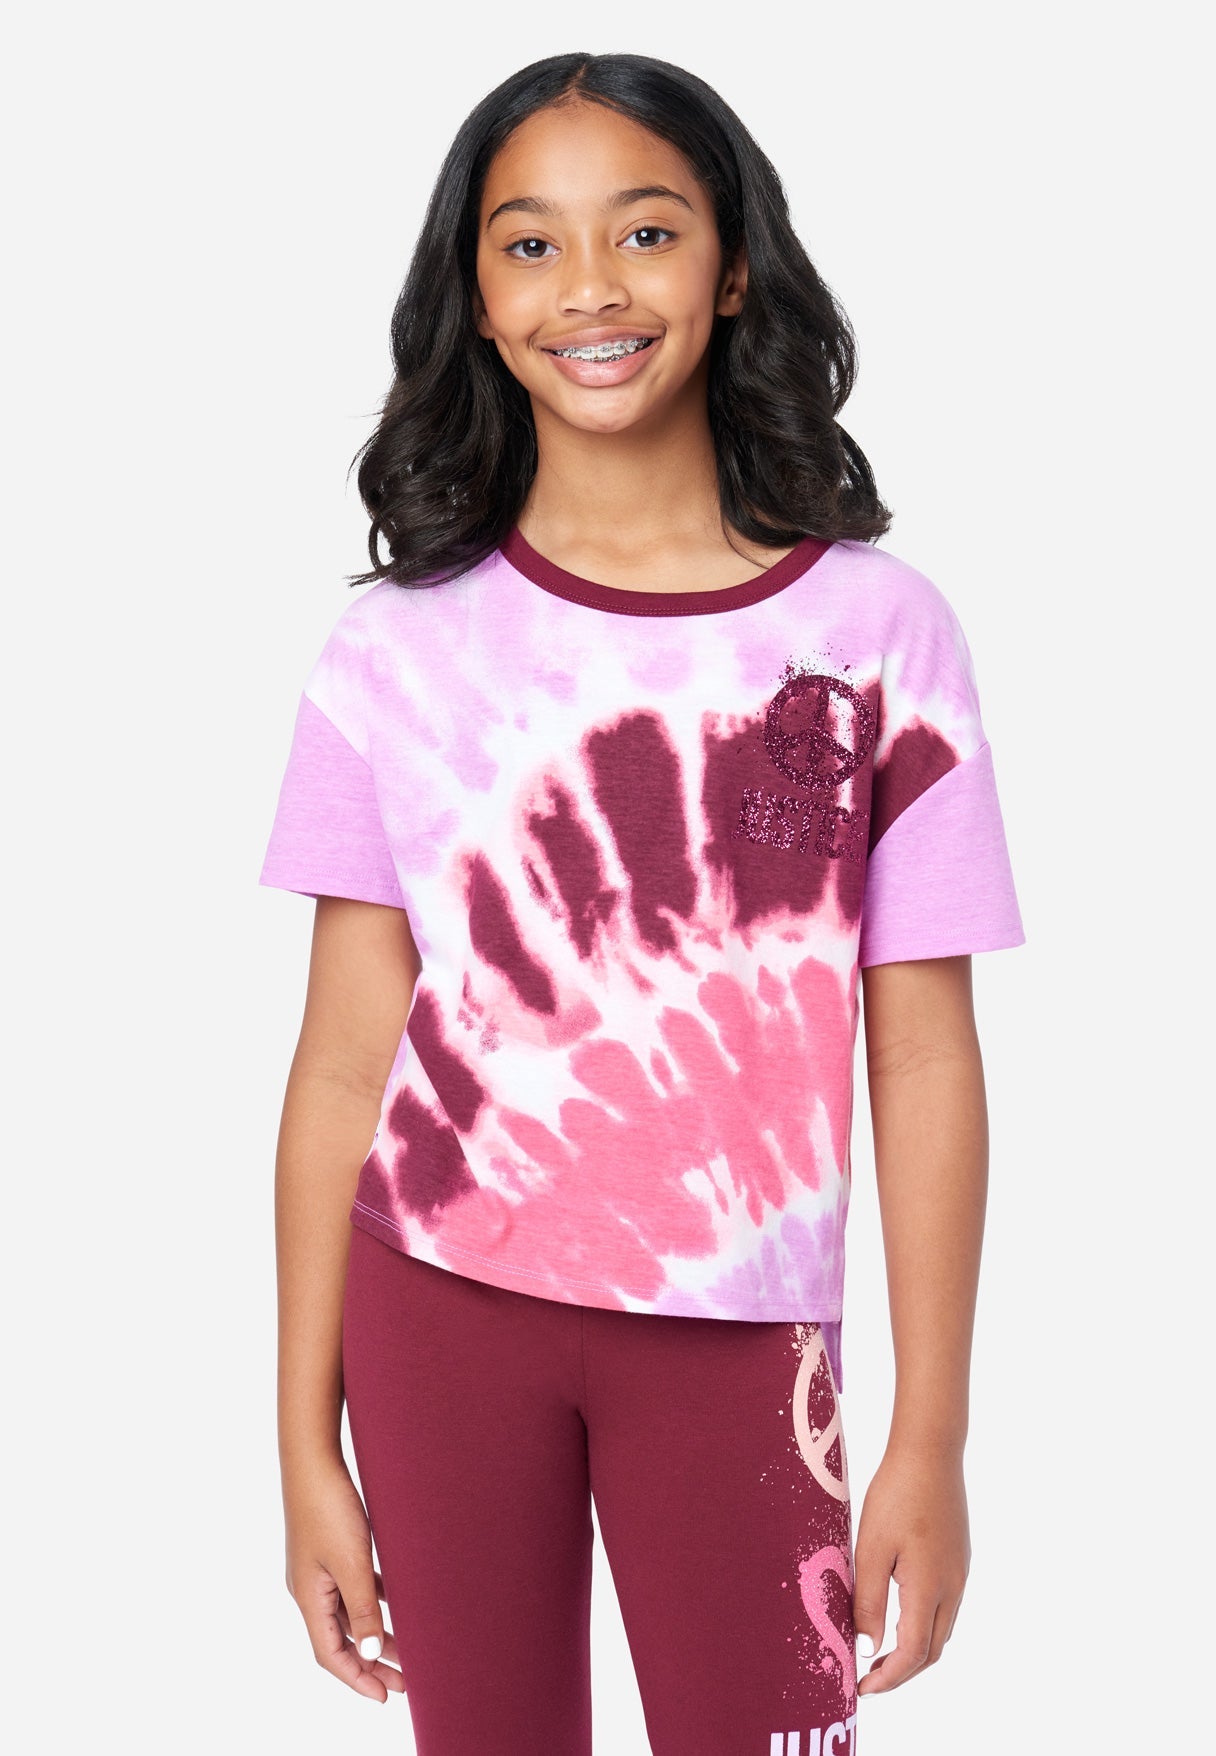 Justice Boxy Girl's Tee in Charisma Tie Dye, Size Xl Plusus (16 Plus/18 Plus)